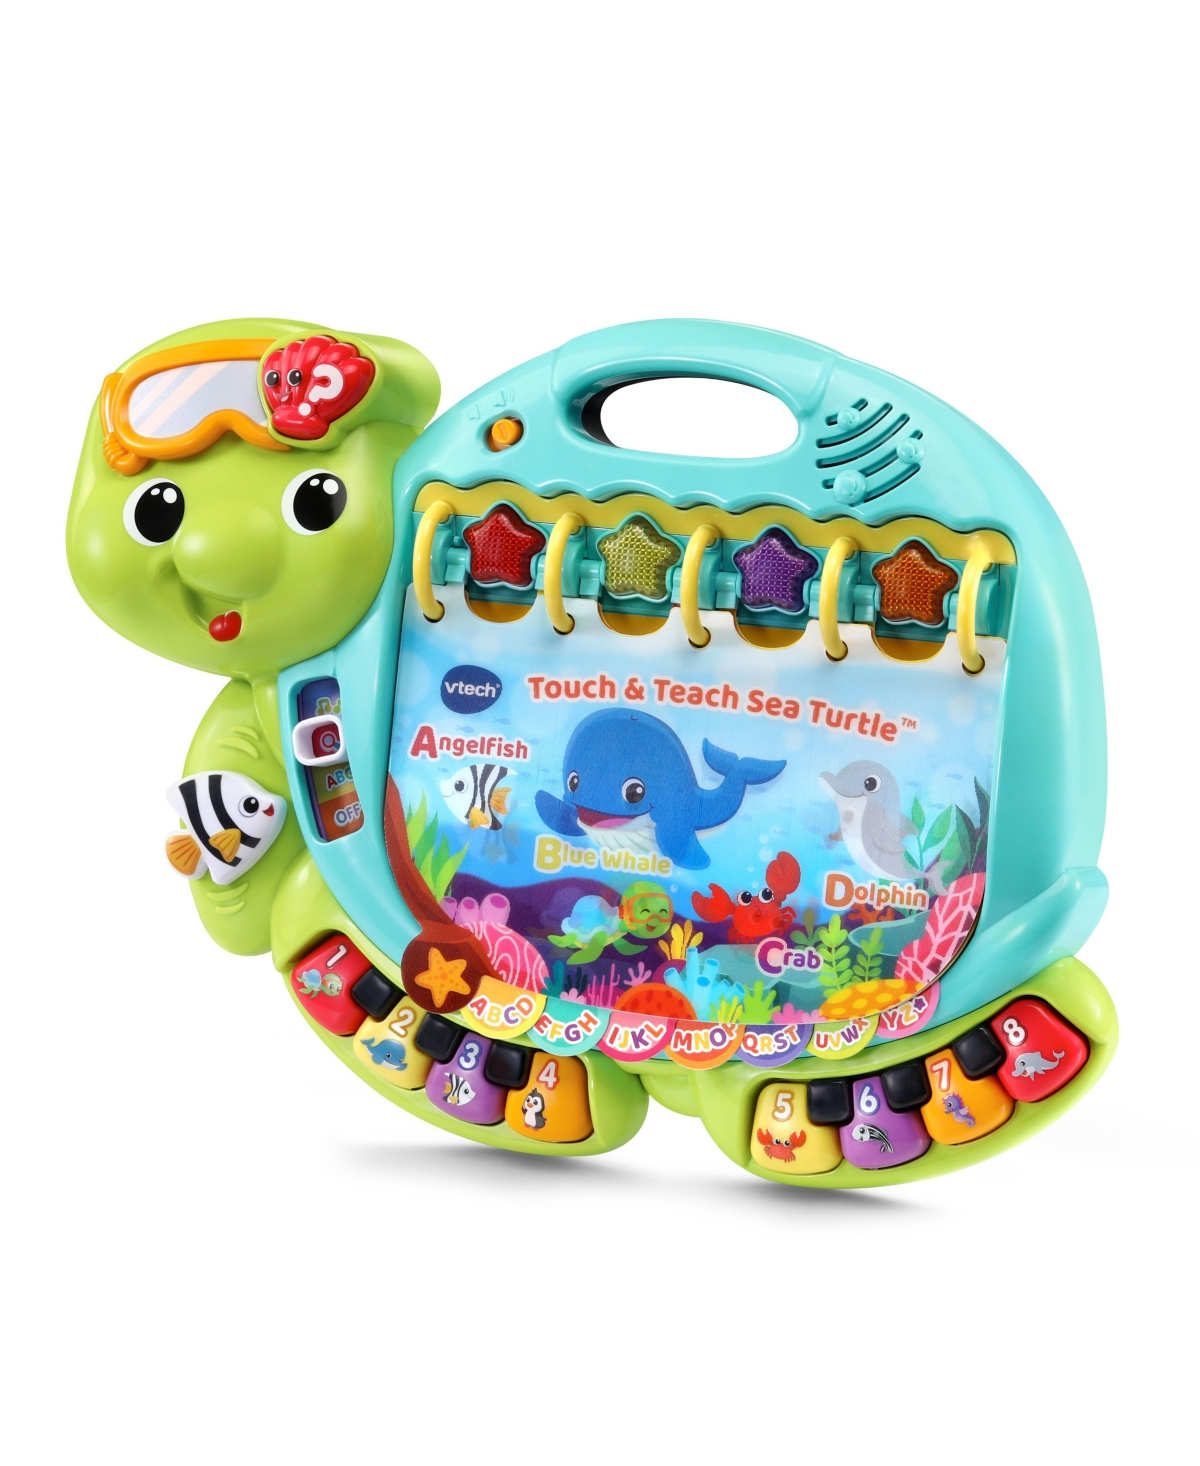 EAN 3417765334009 product image for VTech Touch & Teach Sea Turtle | upcitemdb.com